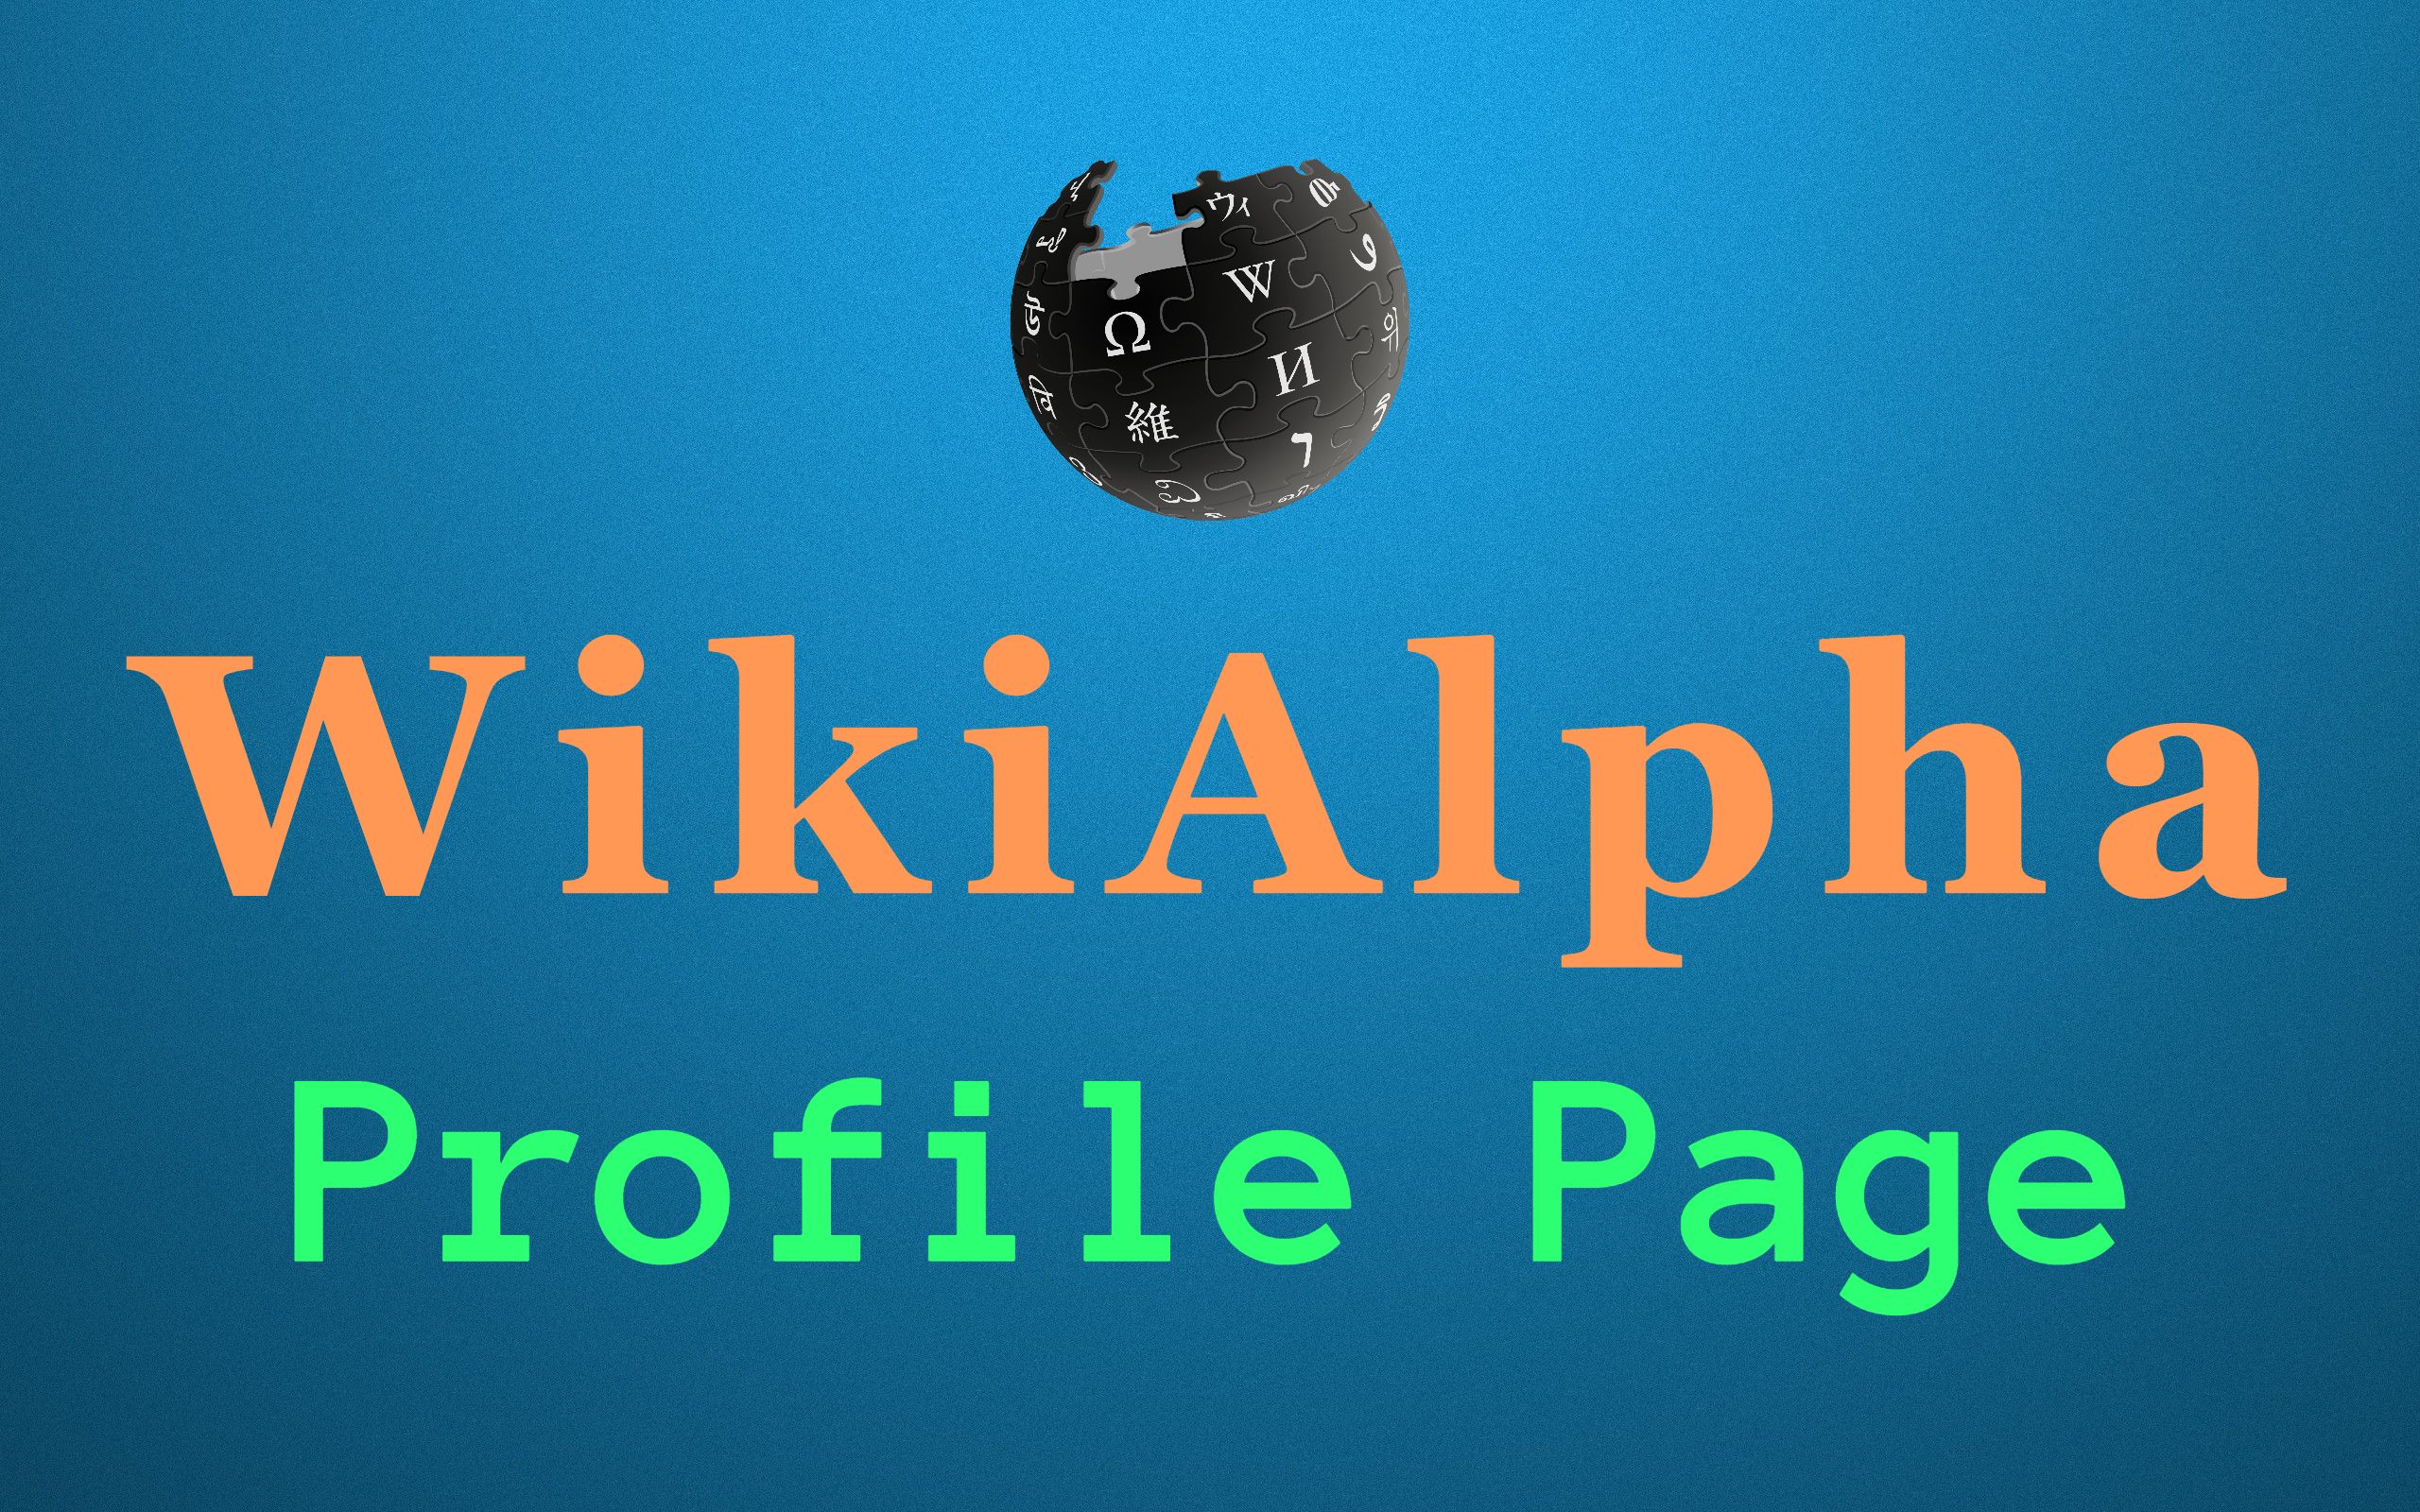 Create an approved WikiAlpha profile page - Guset Post - Press Release - Wikipedia